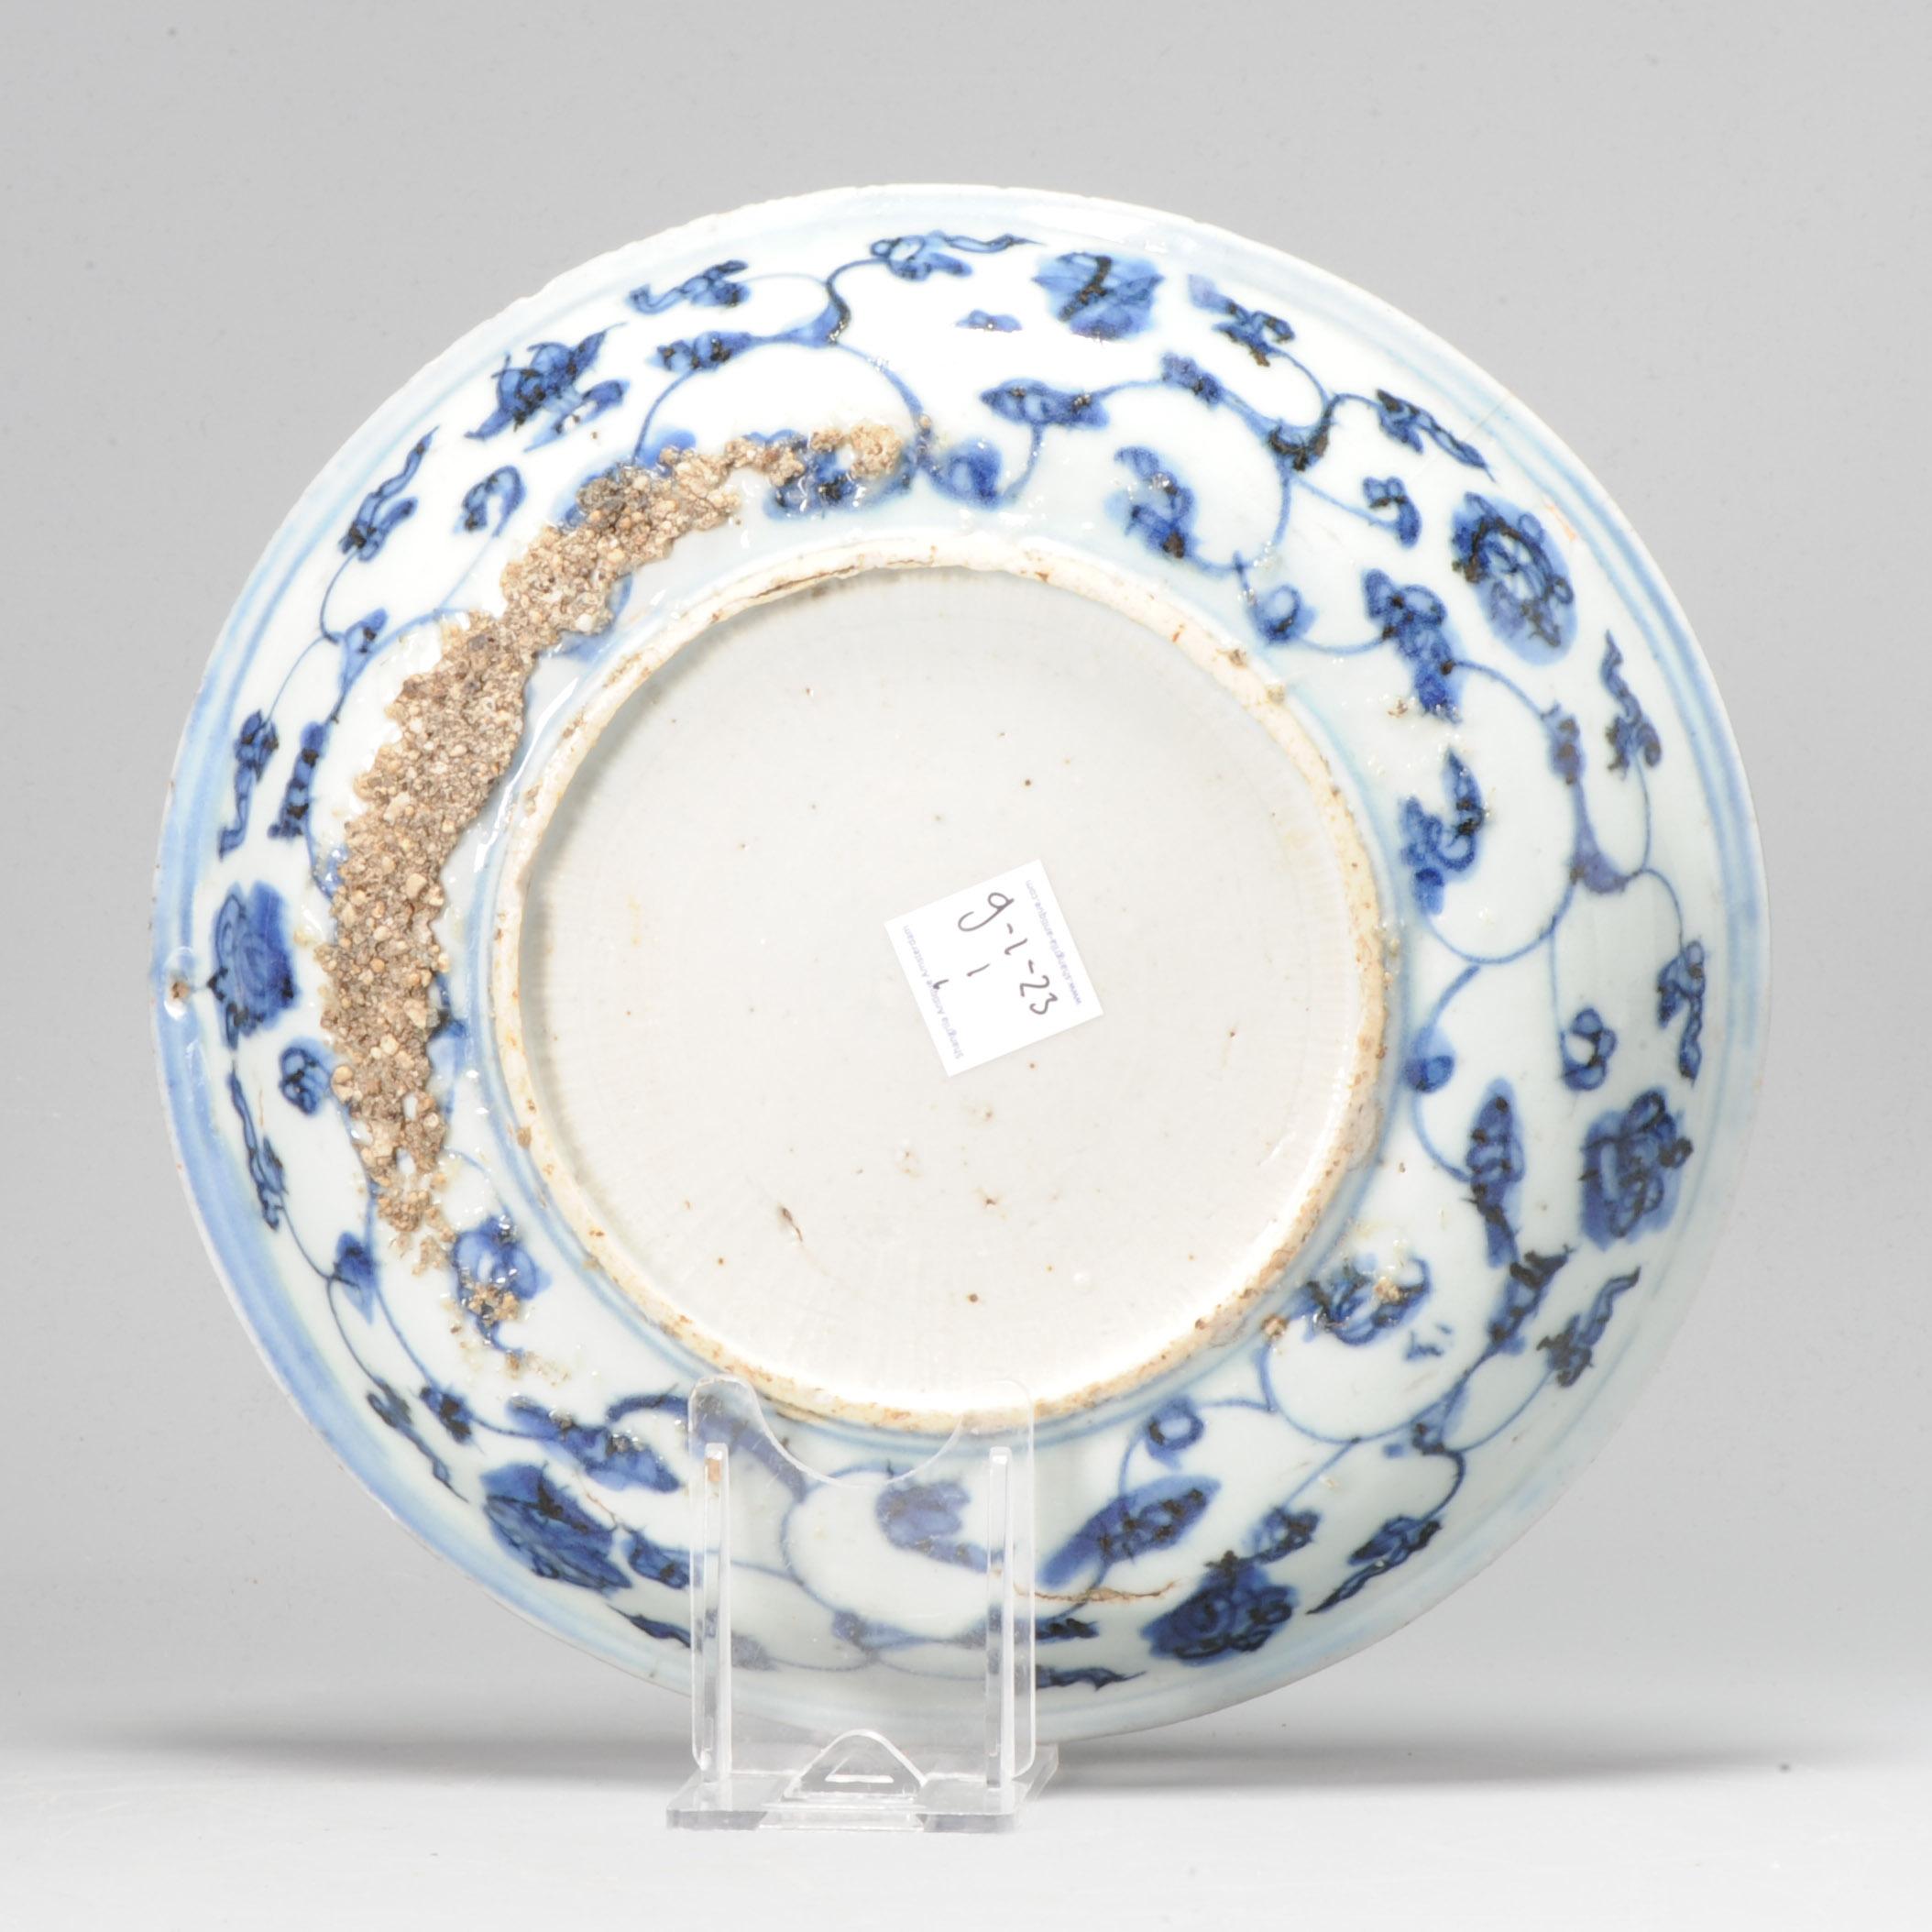 A very nicely decorated and highly unusual dish from the 15th/16th century. The dish is beautifully designed with a beautiful fish in the centre.

9-1-23-1-1

Additional information:
Material: Porcelain & Pottery
Region of Origin: China
Period: 15th